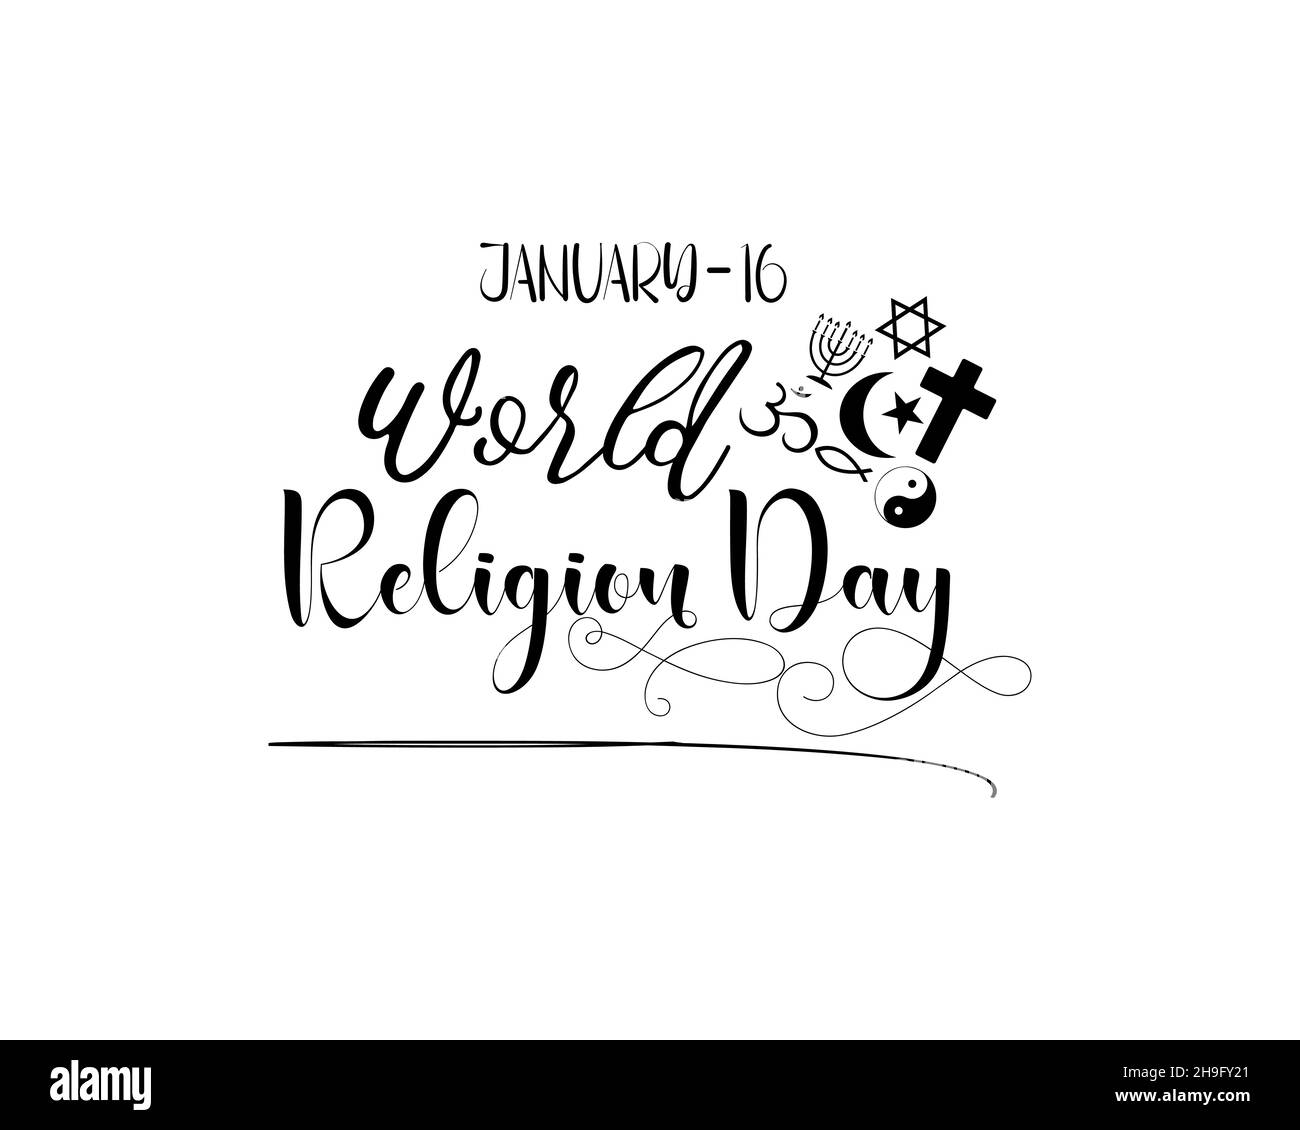 January 16 - Calligraphy style hand lettering design for World Religion Day. Vector template for banner, poster, tshirt, card. Stock Vector